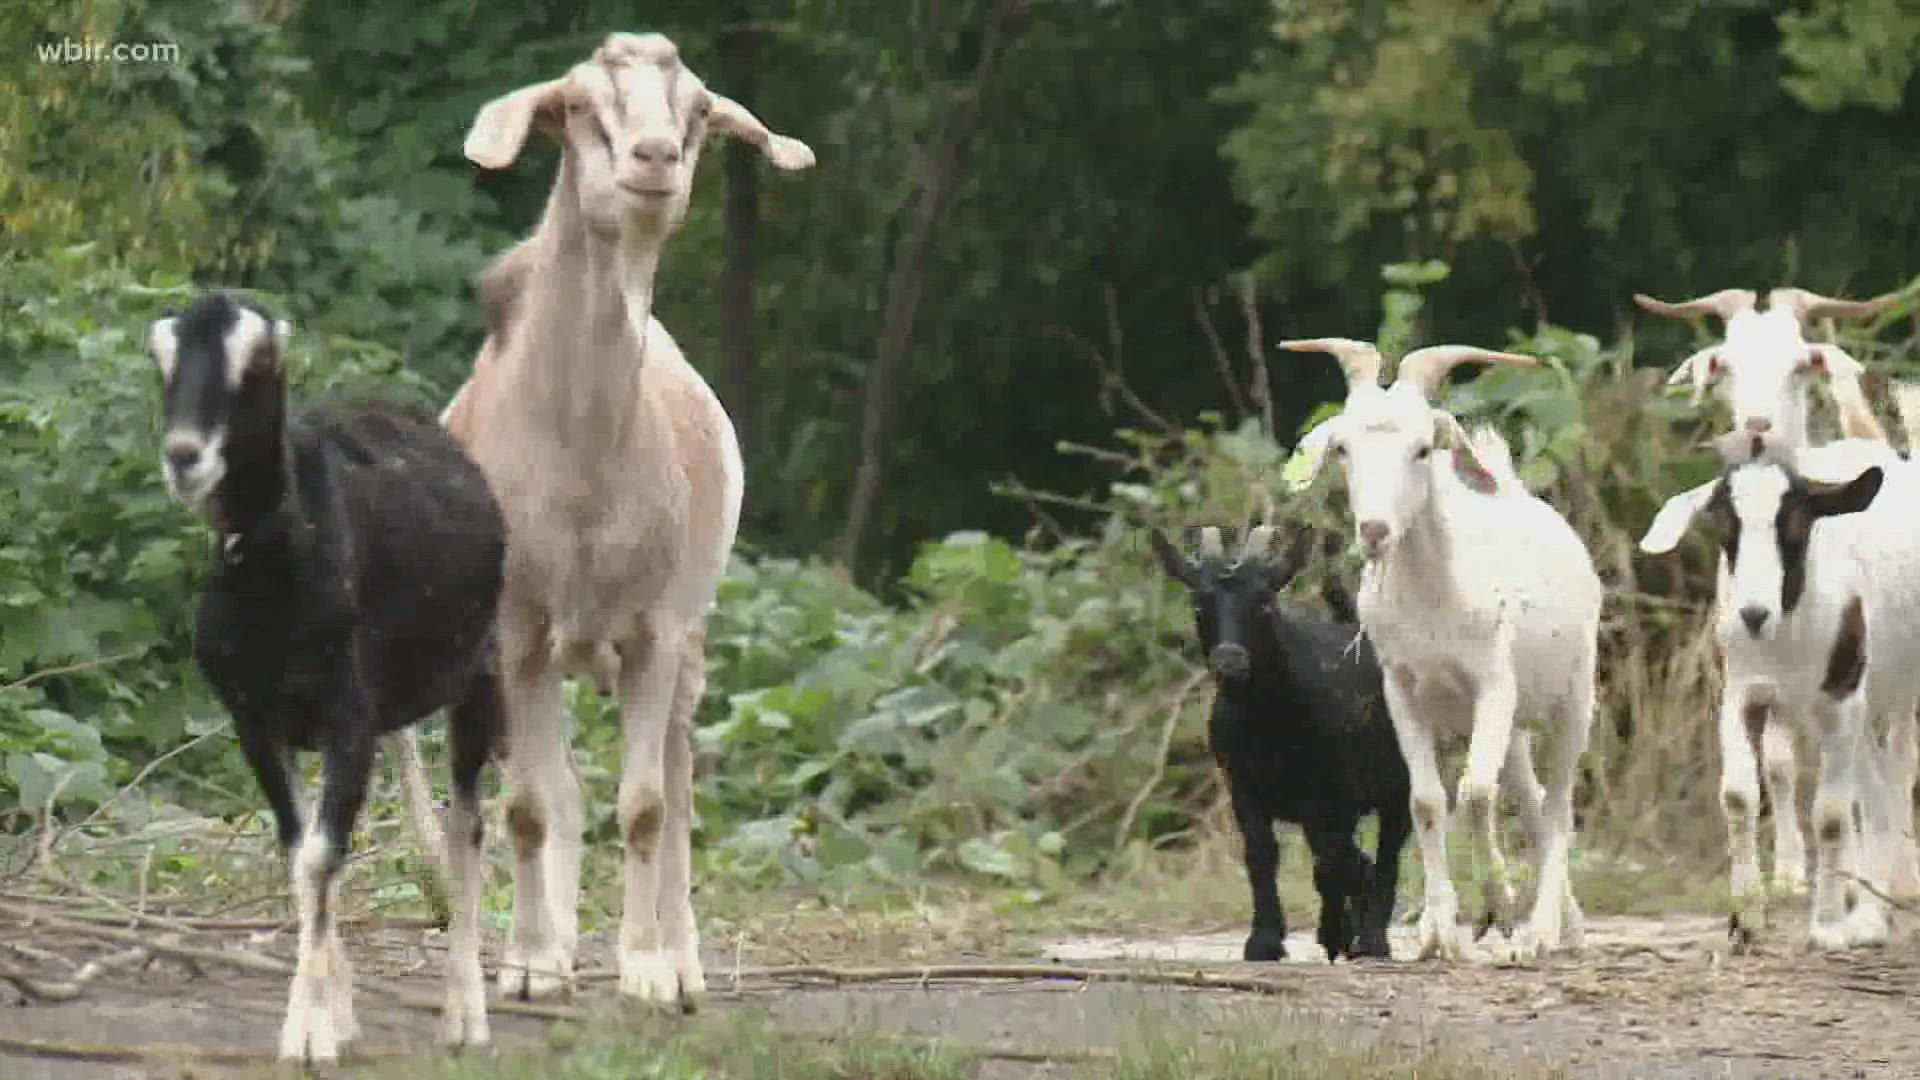 More goats are expected to enter campus on Friday, clearing kudzu ahead of the college's homecoming.